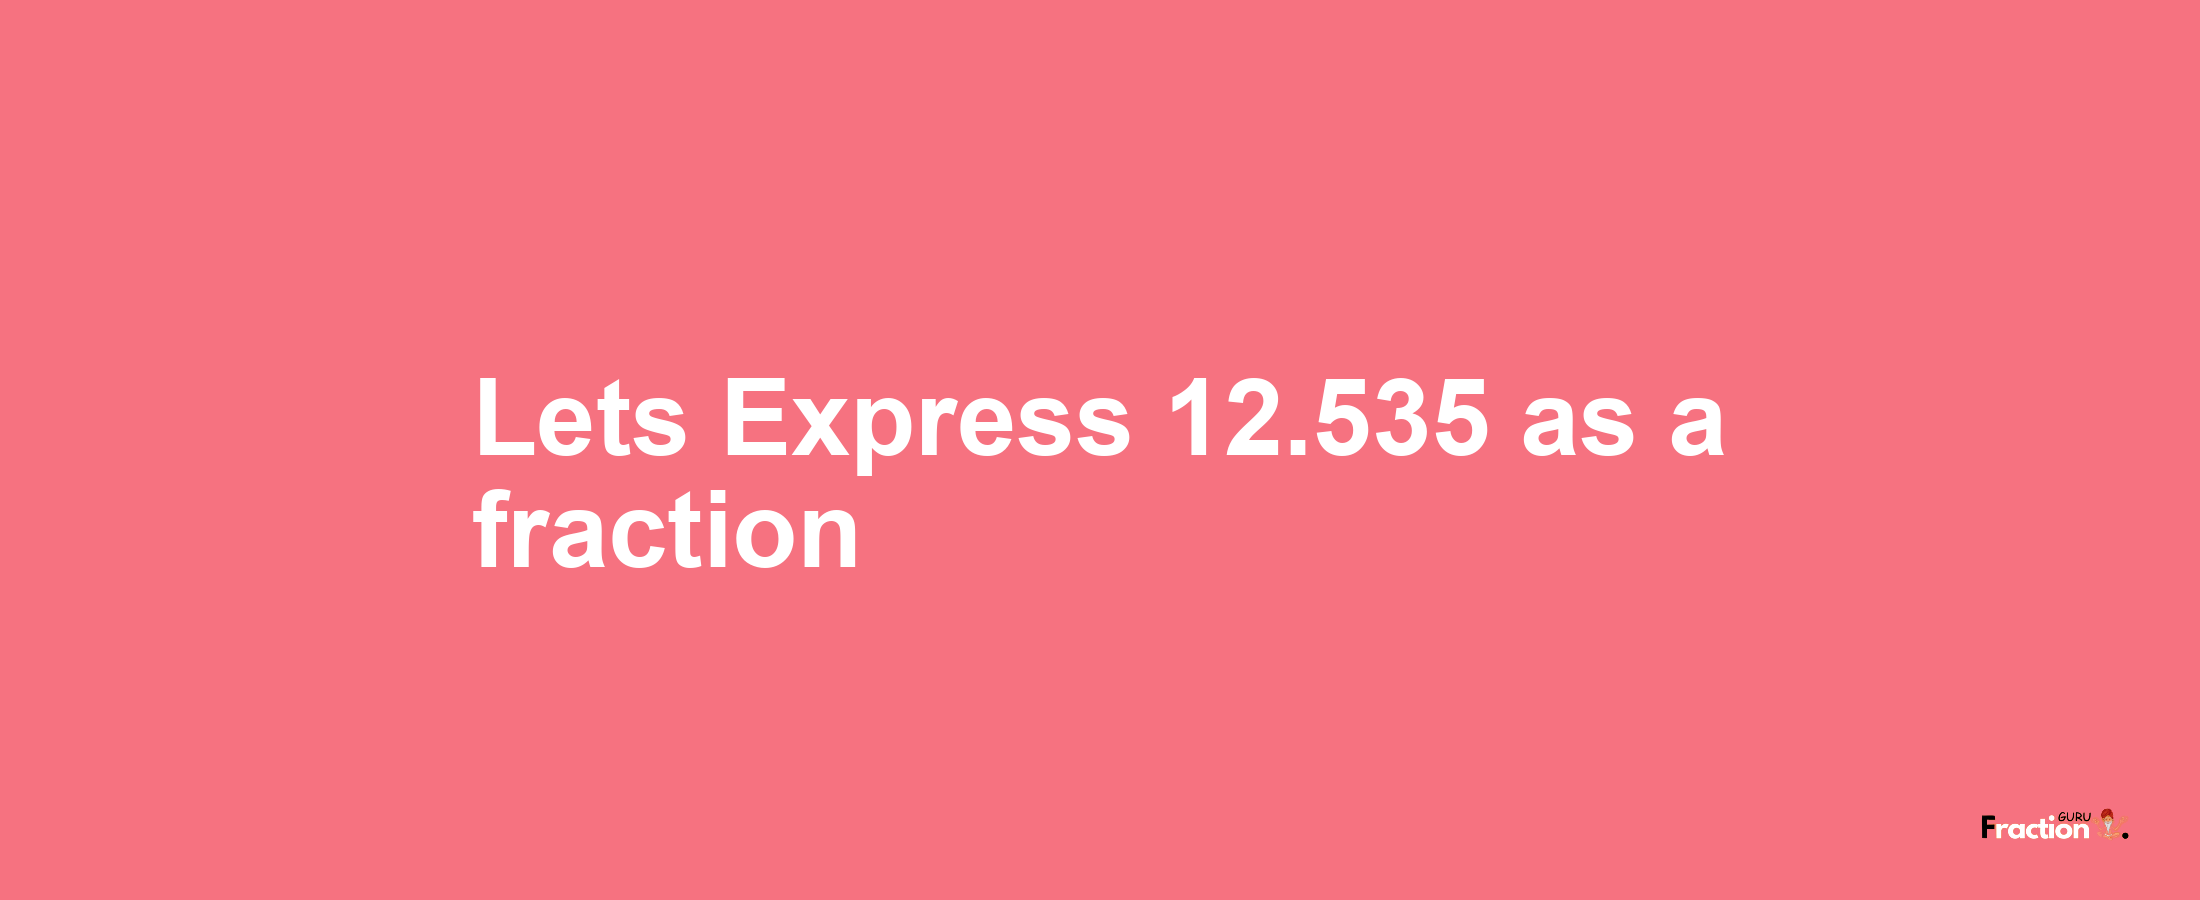 Lets Express 12.535 as afraction